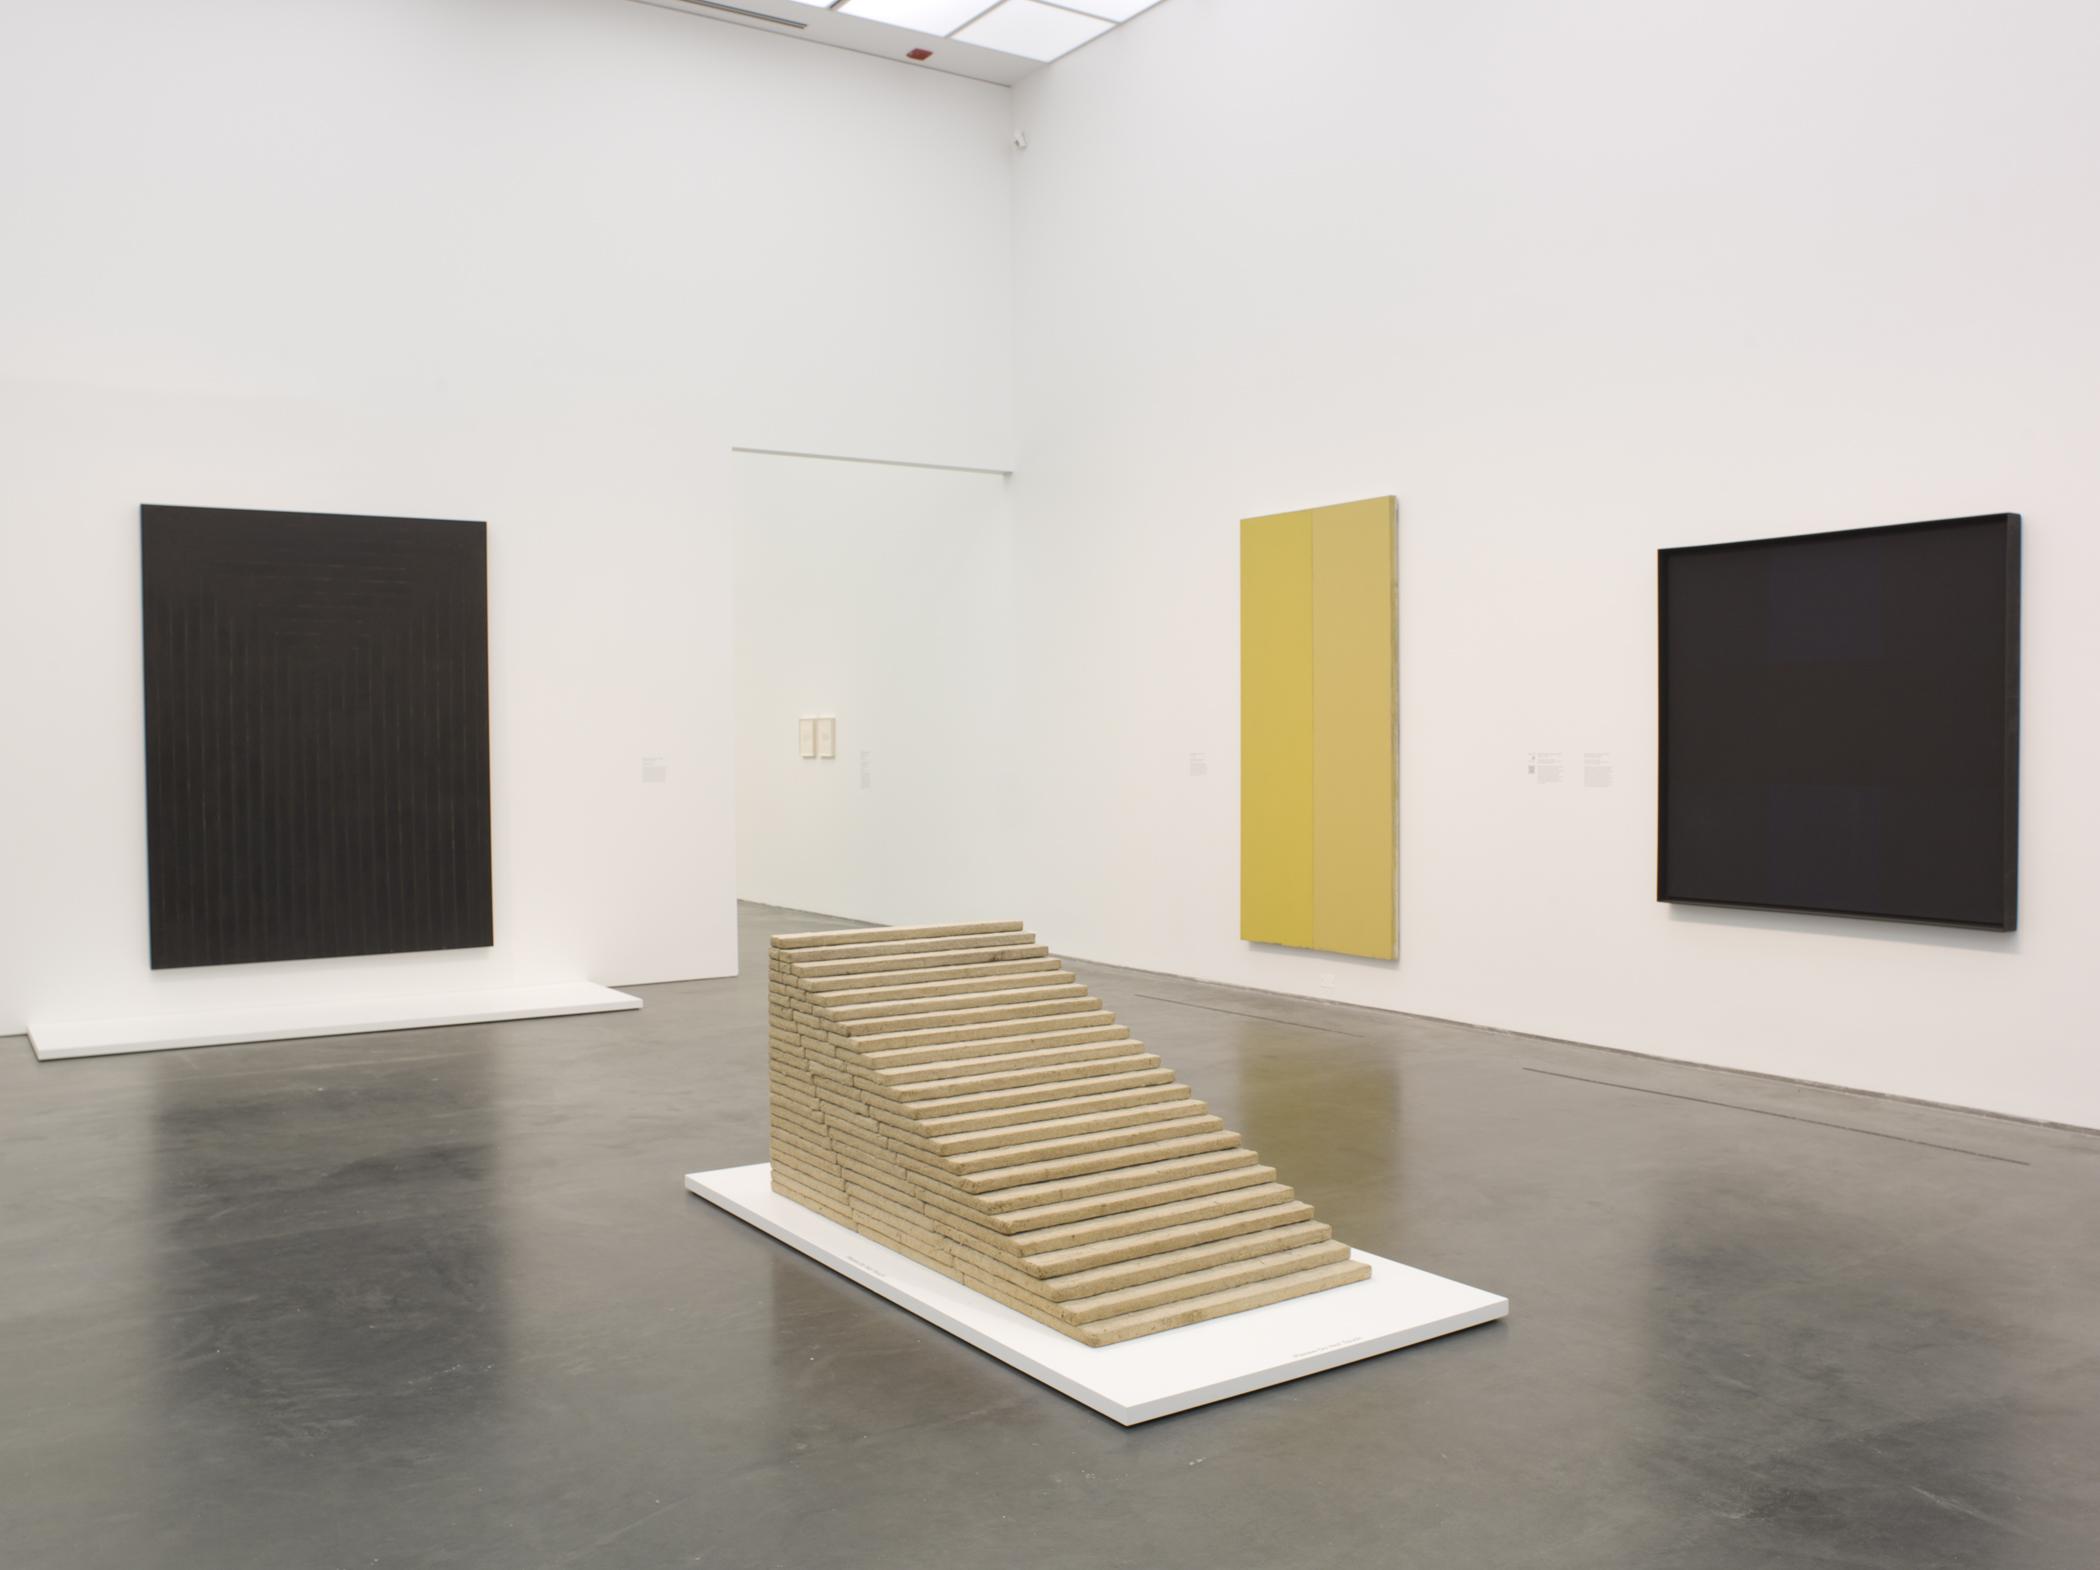 A gallery view with minimalist color field paintings on the walls, and a stairway-like sculpture in the middle of the room.